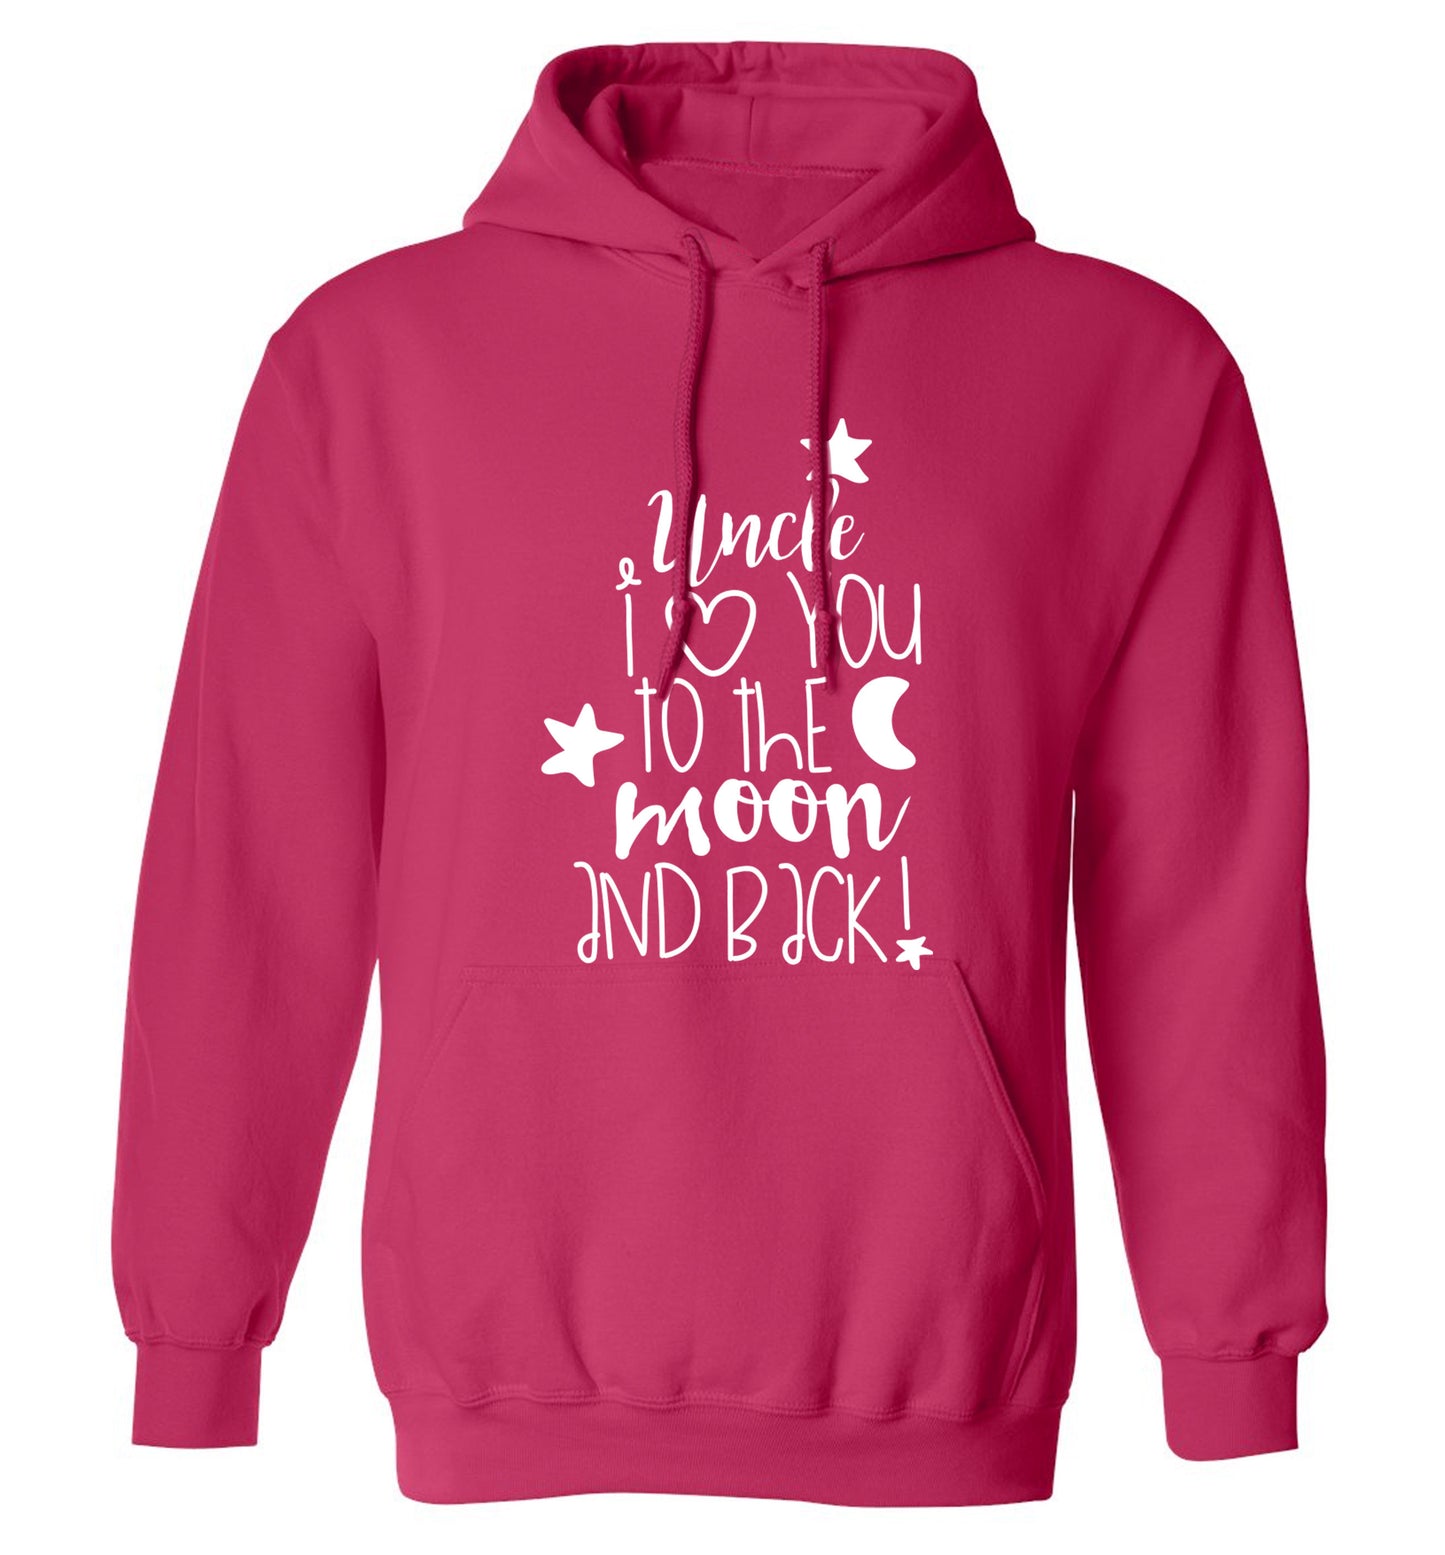 Uncle I love you to the moon and back adults unisex pink hoodie 2XL